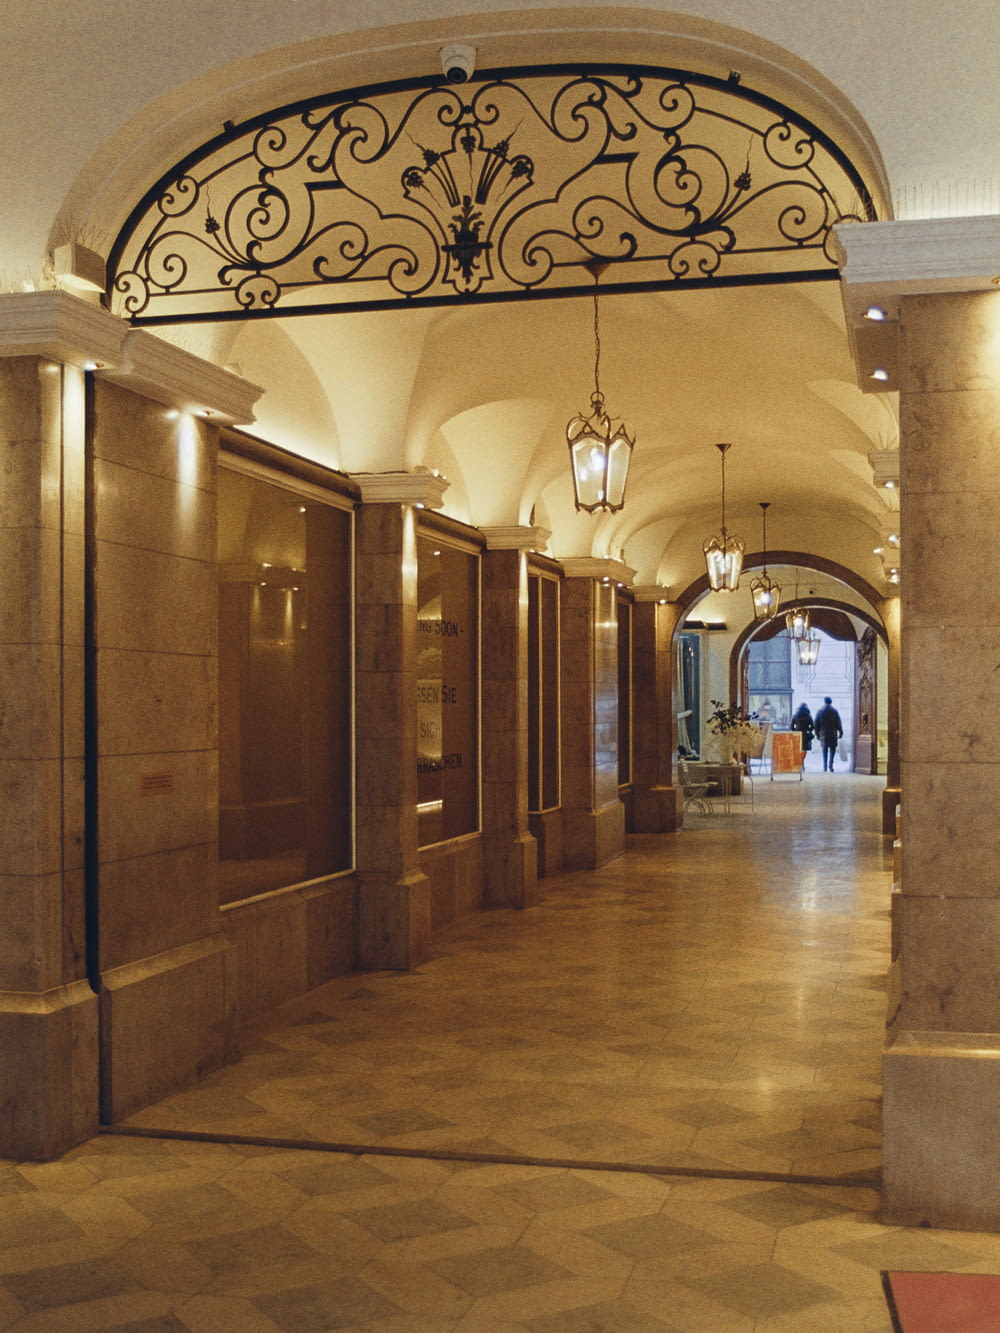 a long hallway with a wrought iron gate